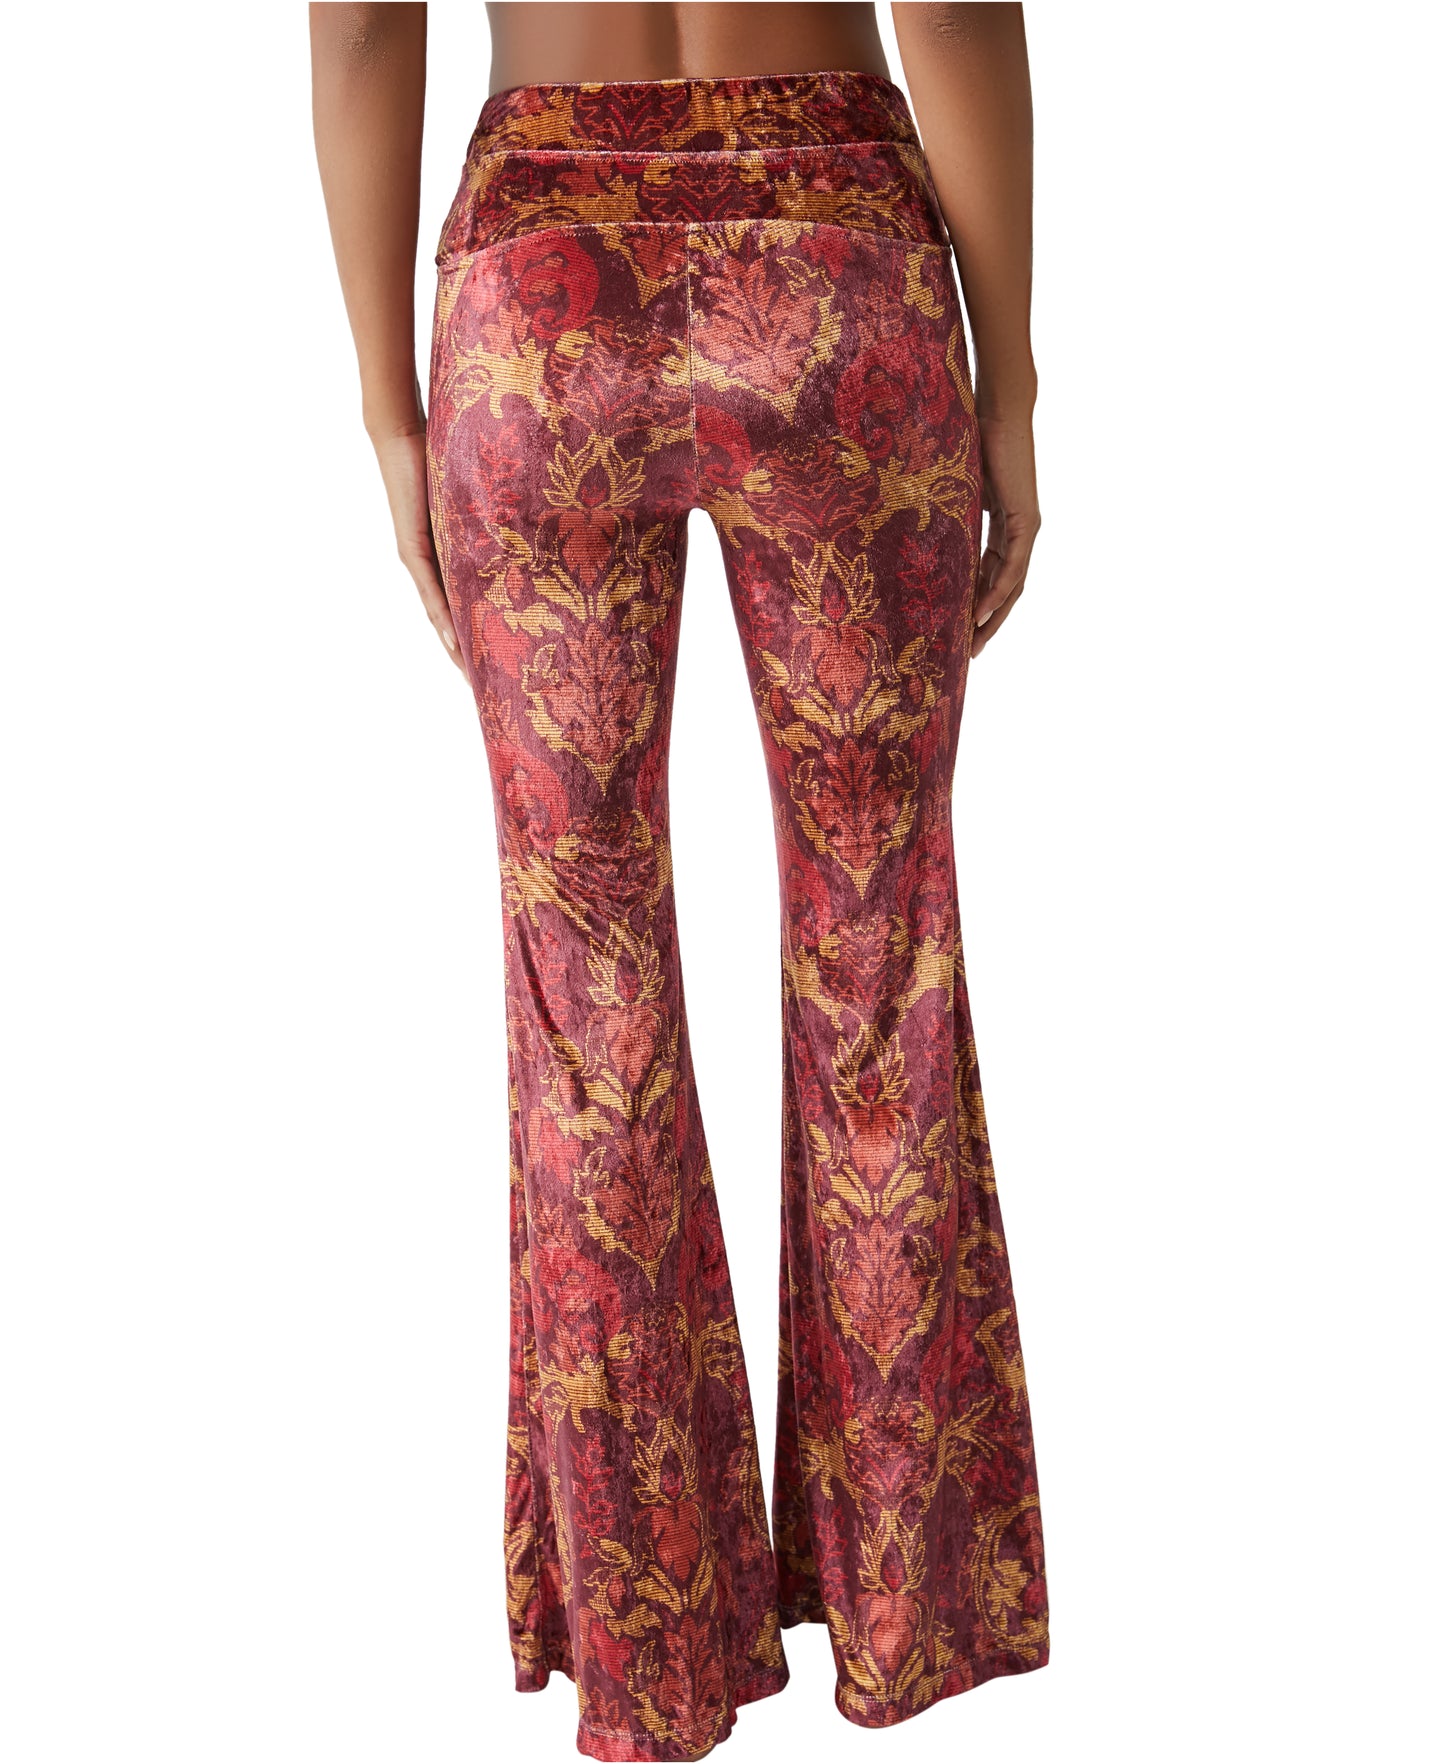 Free People Hold Me Closer Bell Bottom